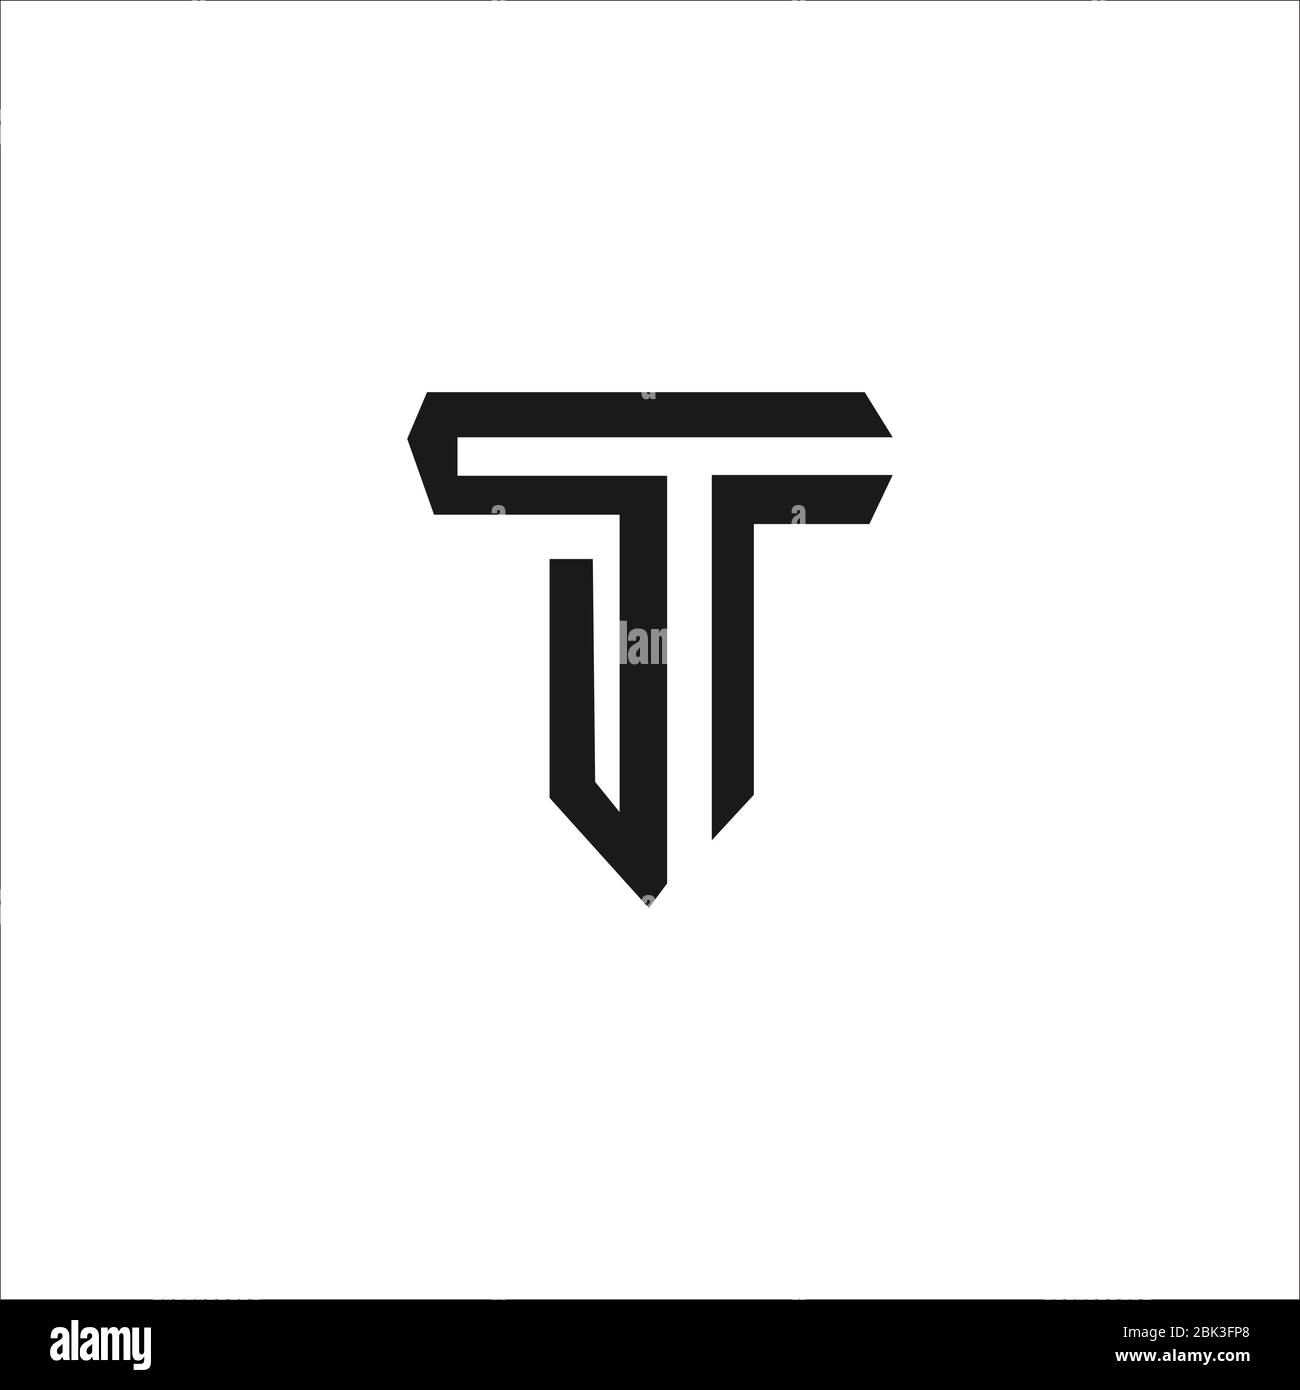 3d letter t logo Black and White Stock Photos & Images - Alamy